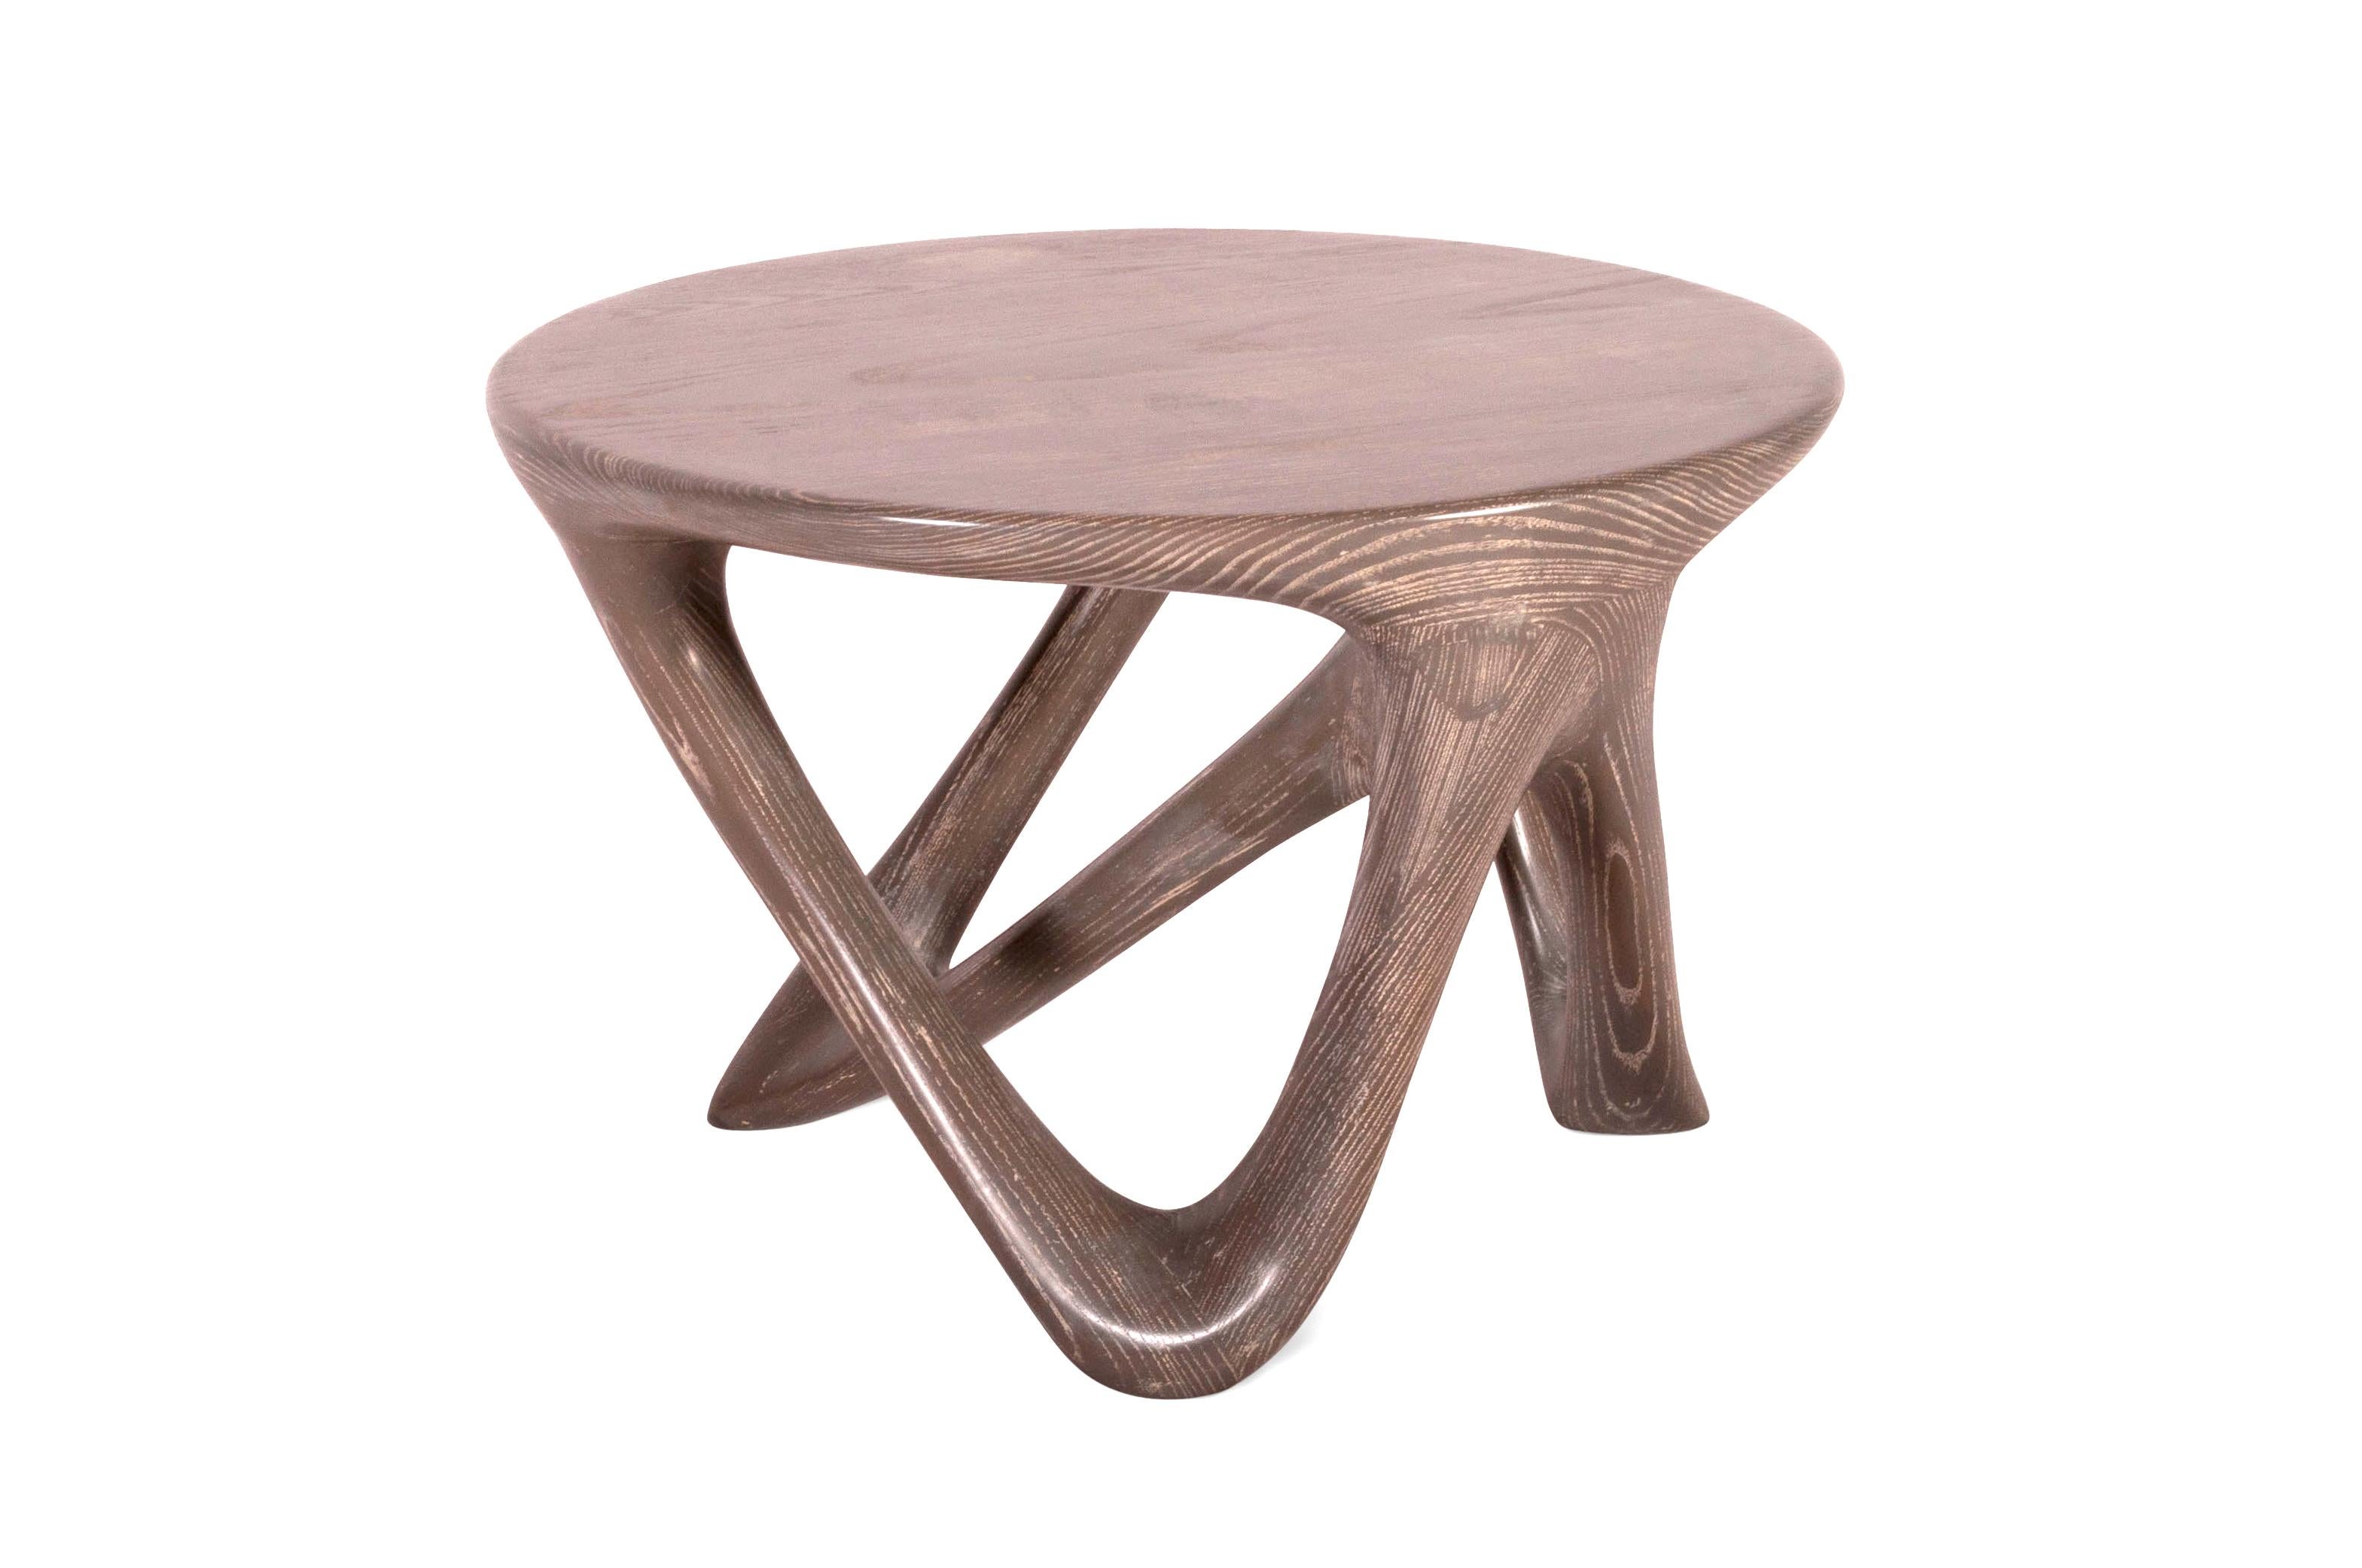 Painted Amorph Ya Modern Side Table in Mesa Stain on Solid Wood For Sale